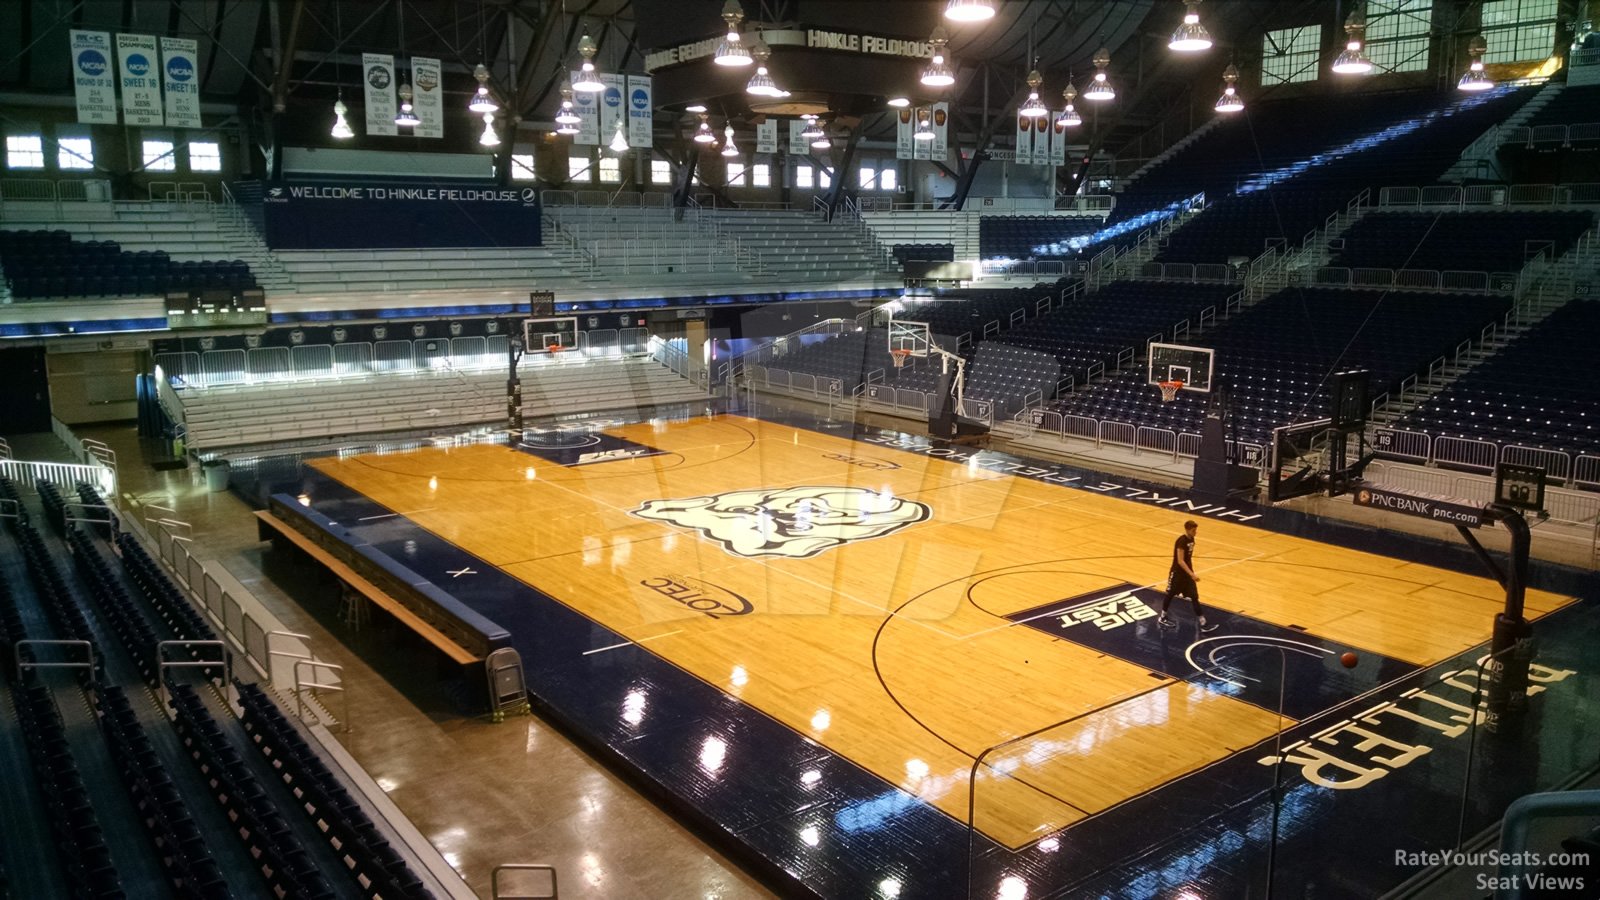 section 202, row 3 seat view  - hinkle fieldhouse